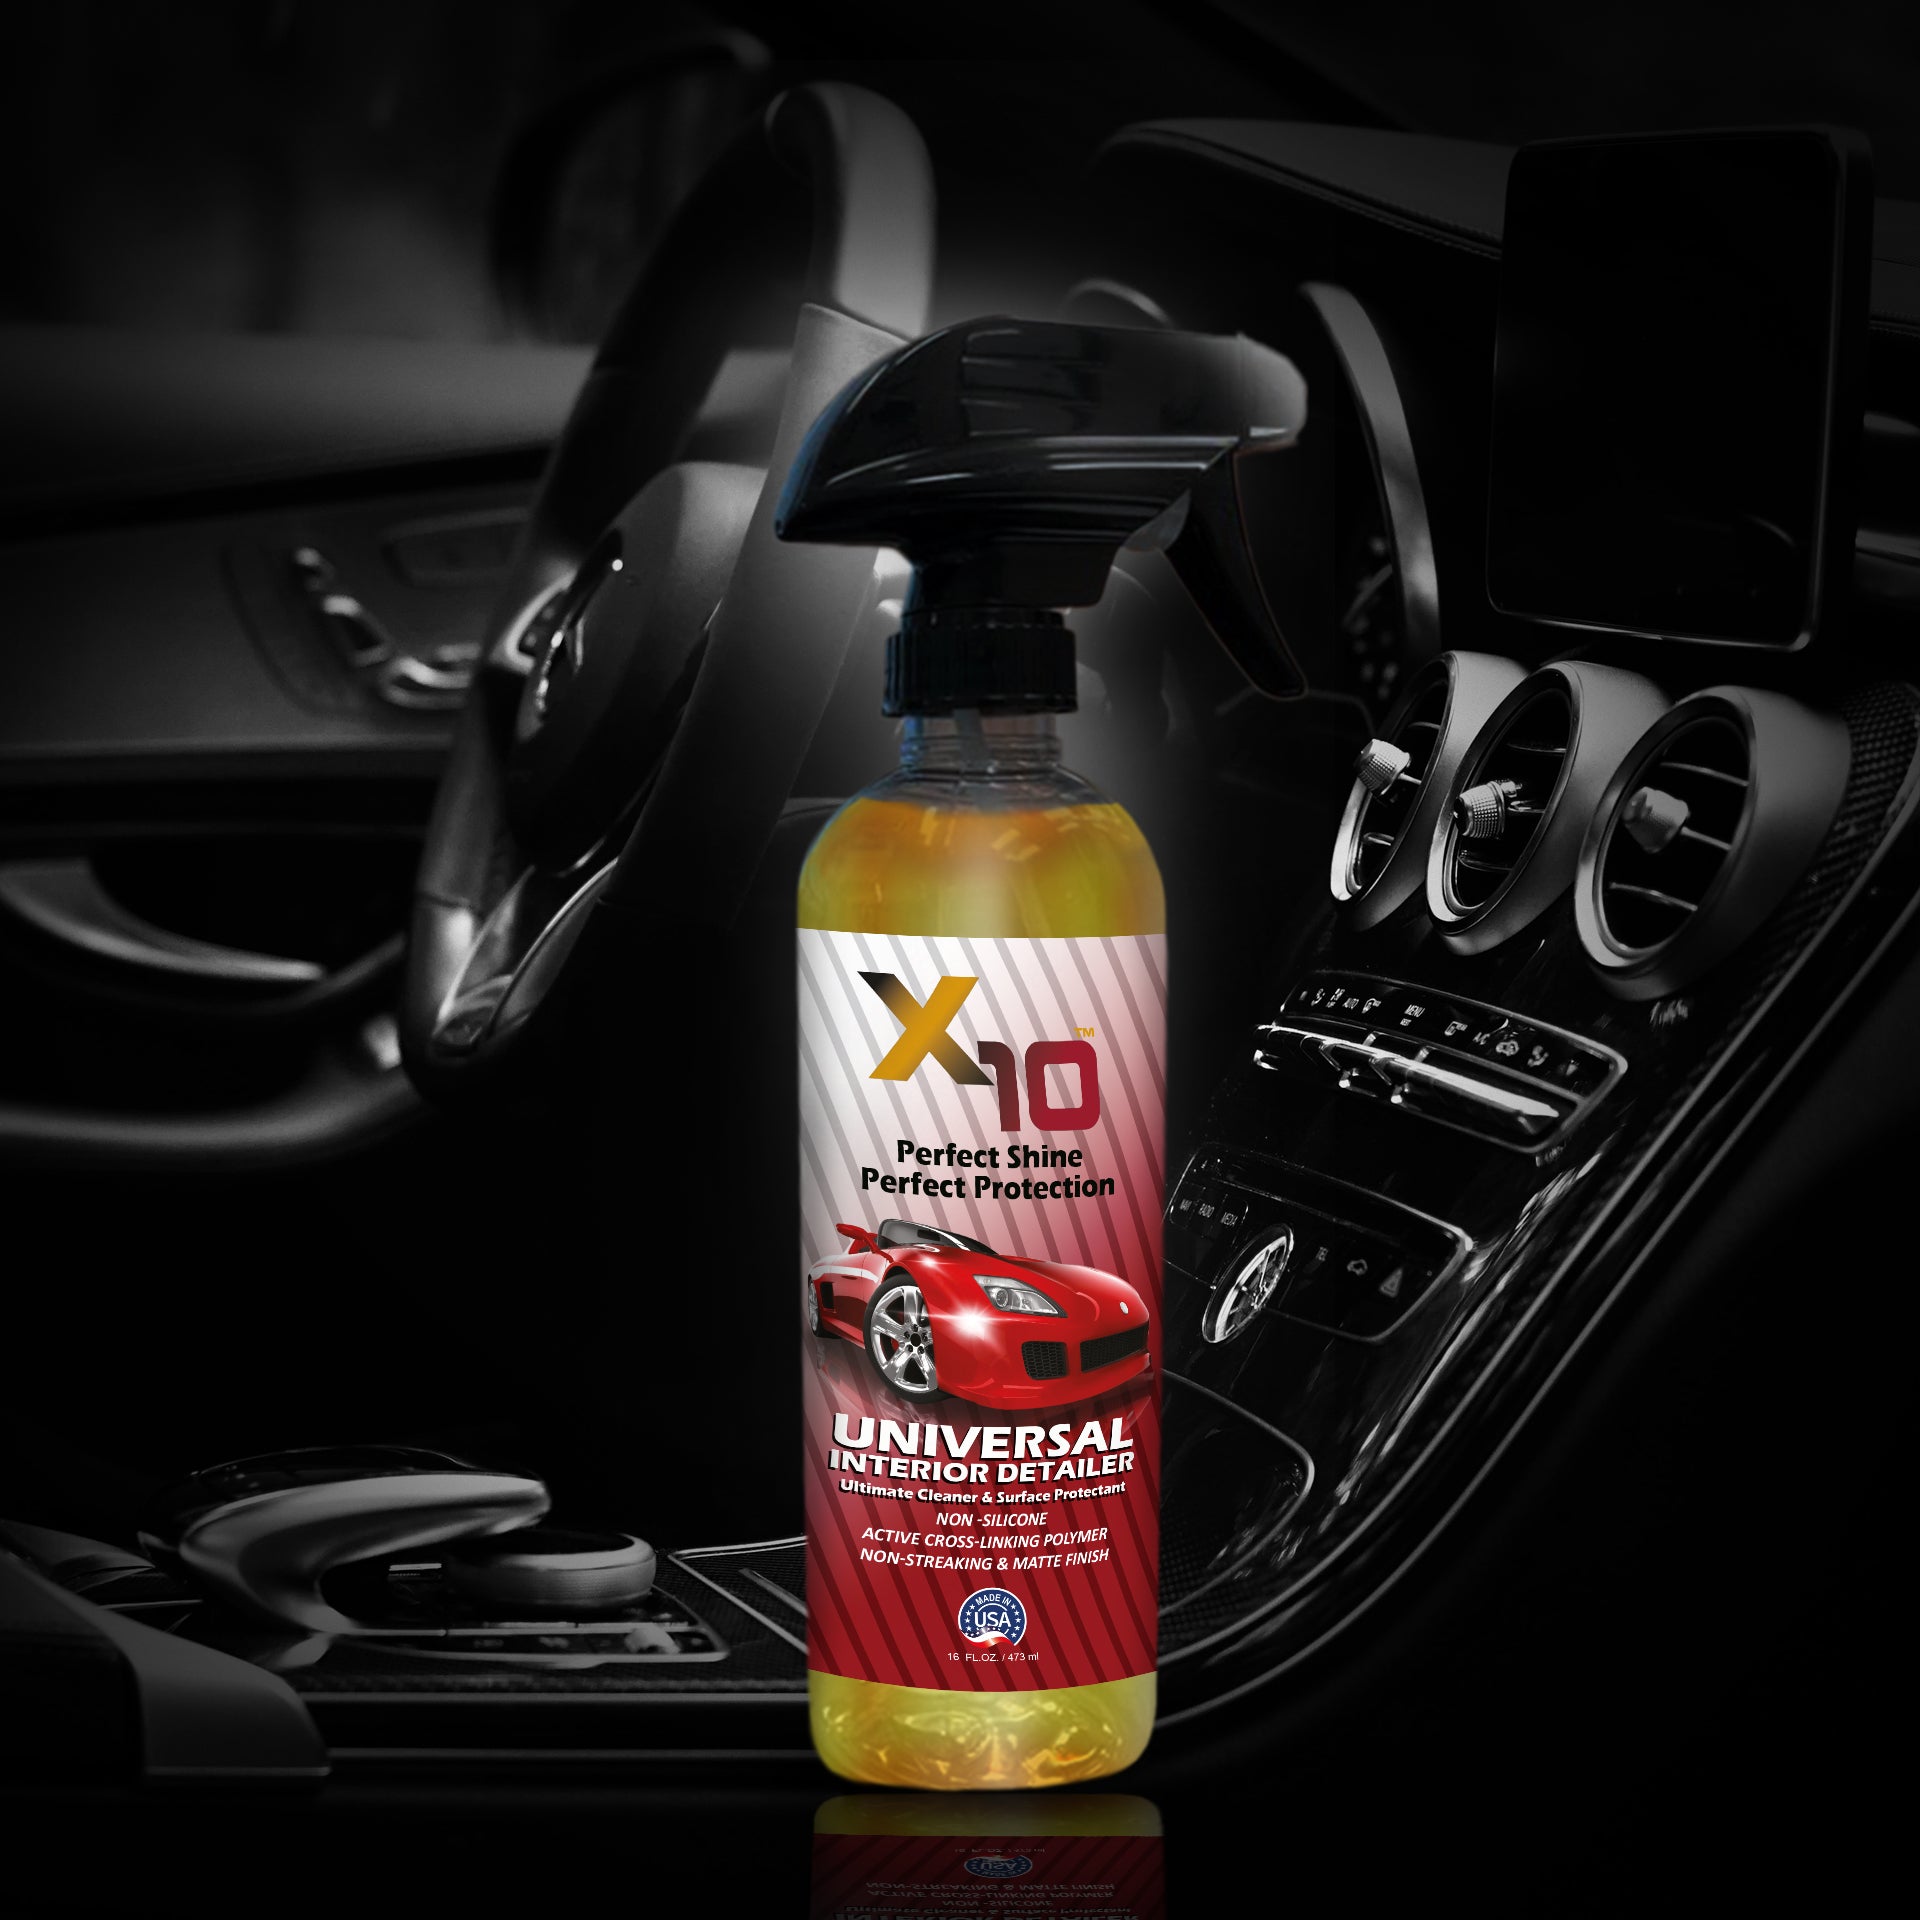 X10 Universal Interior Detailer (16 oz) - Total Car Interior Cleaner and Protectant Spray |Safe for Cleaning & Detailing of Leather, Dashboard